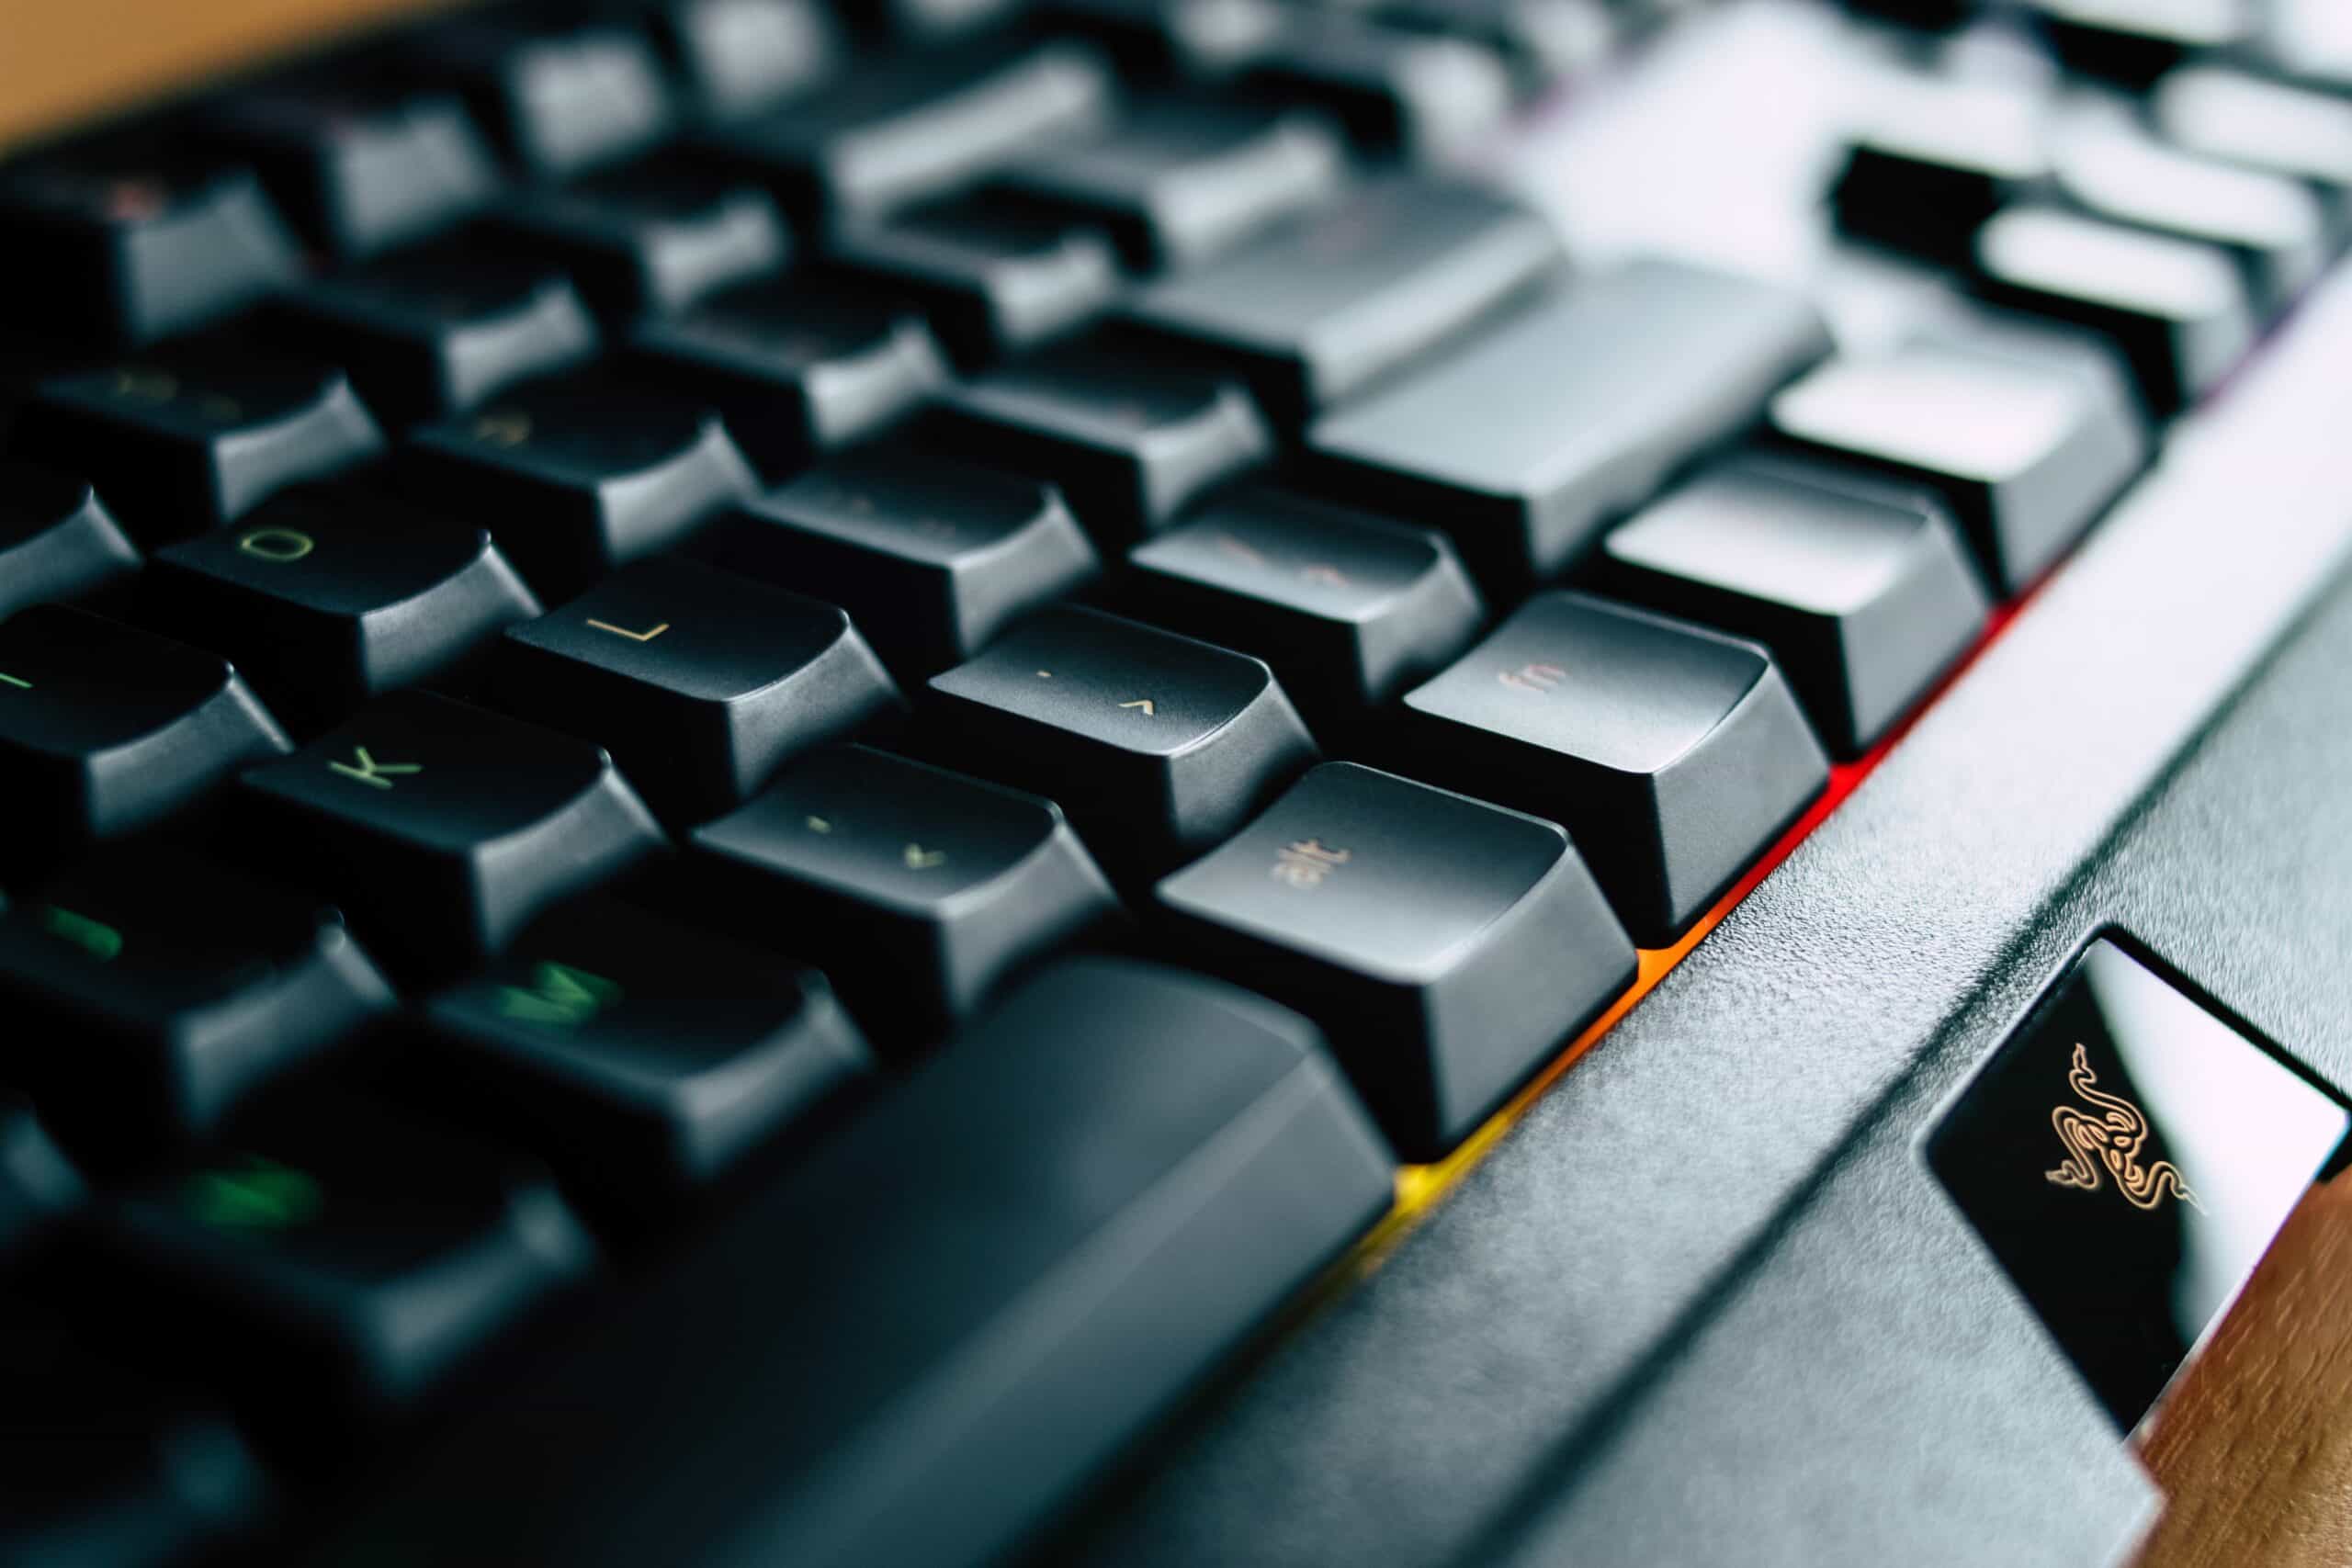 Close up picture of a Razer keyboard to help illustrate the best Razer keyboards